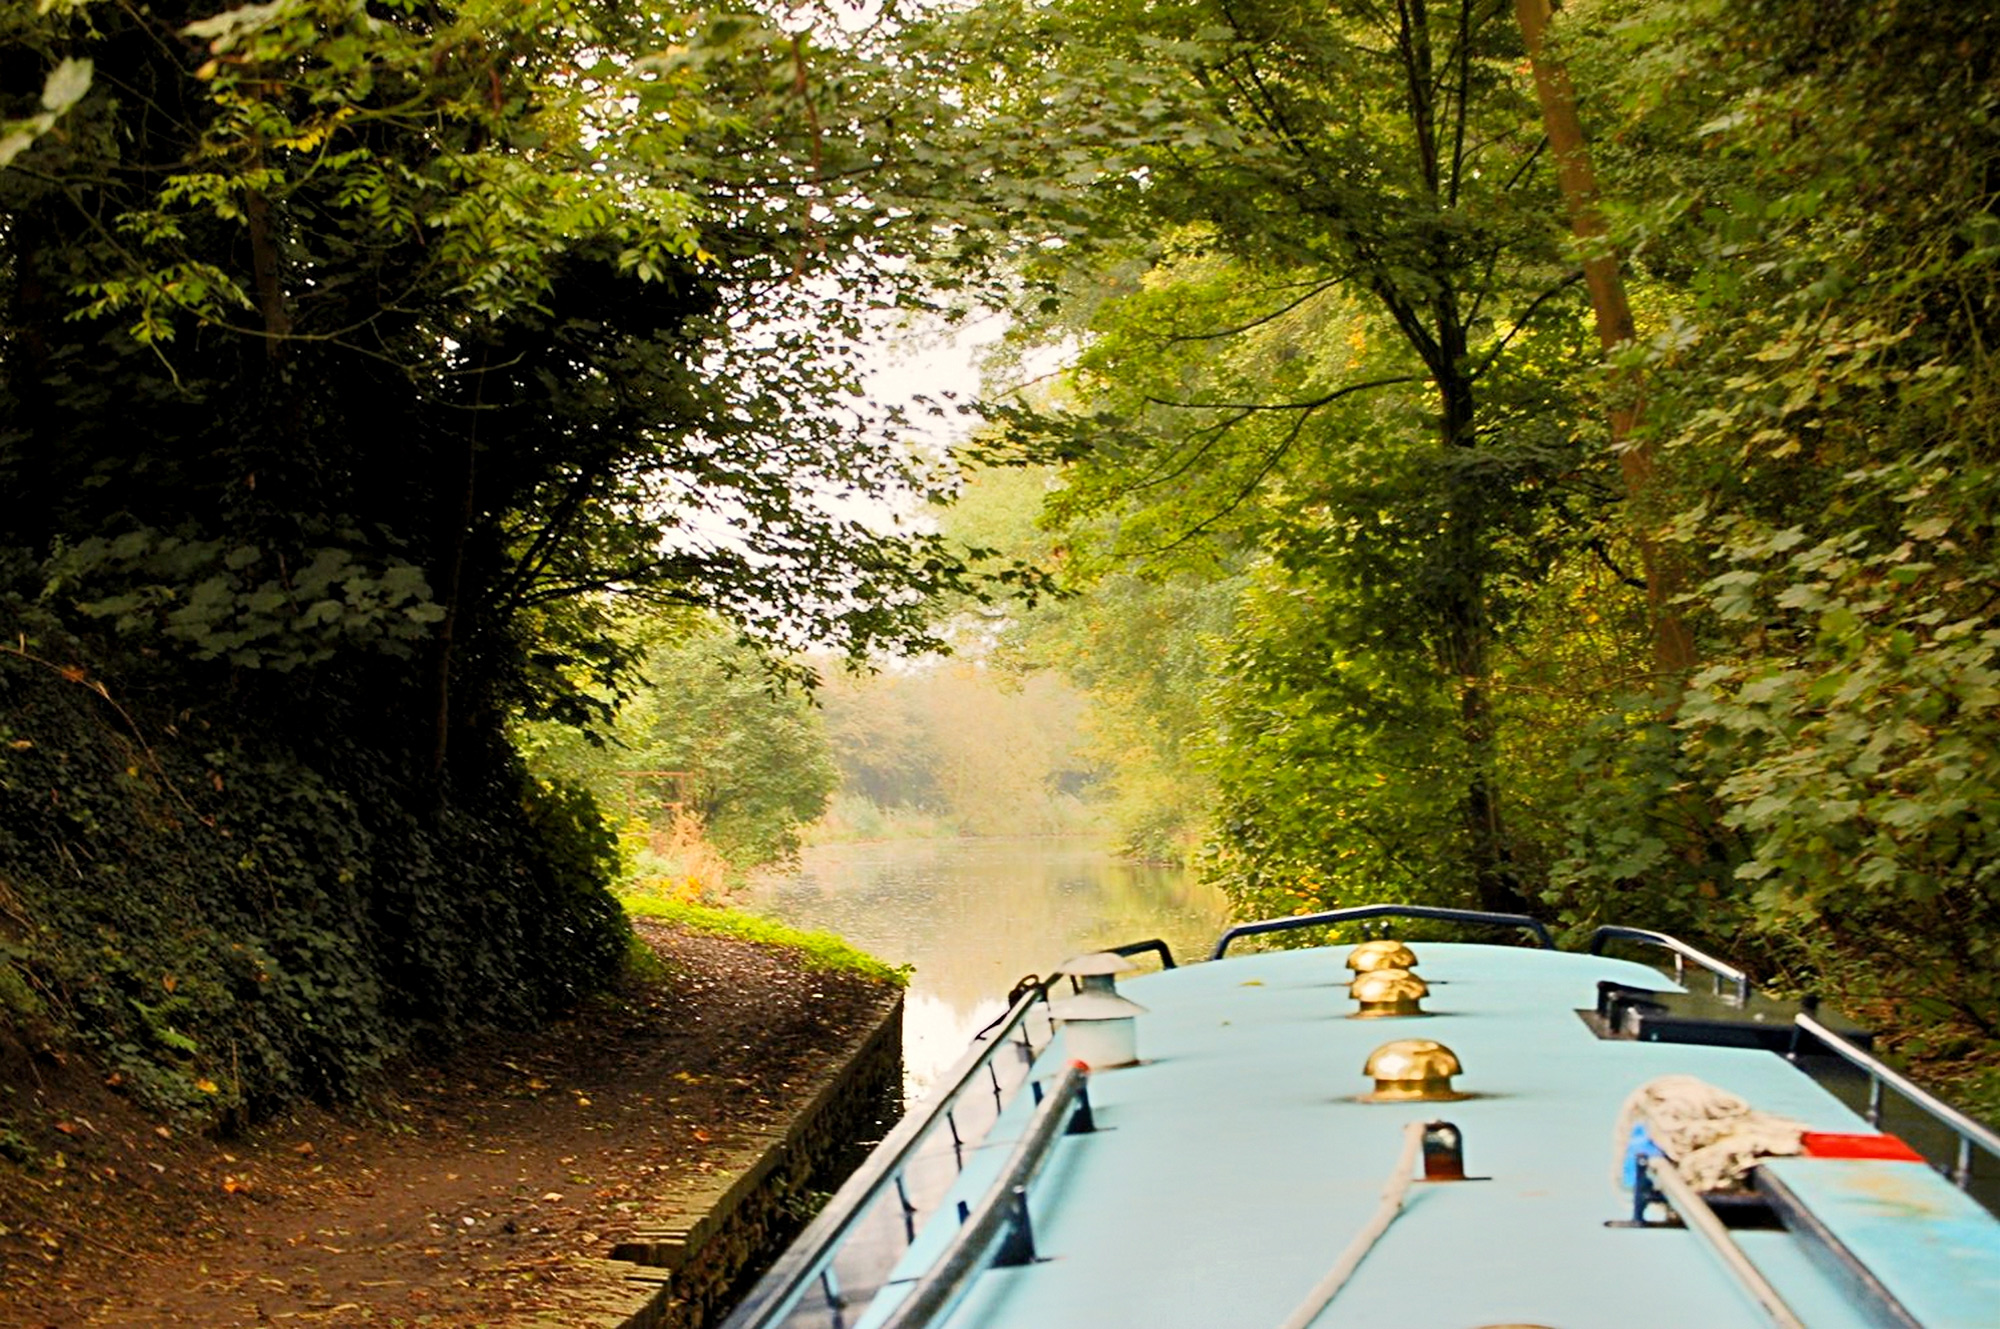 Try a canal narrowboat holiday